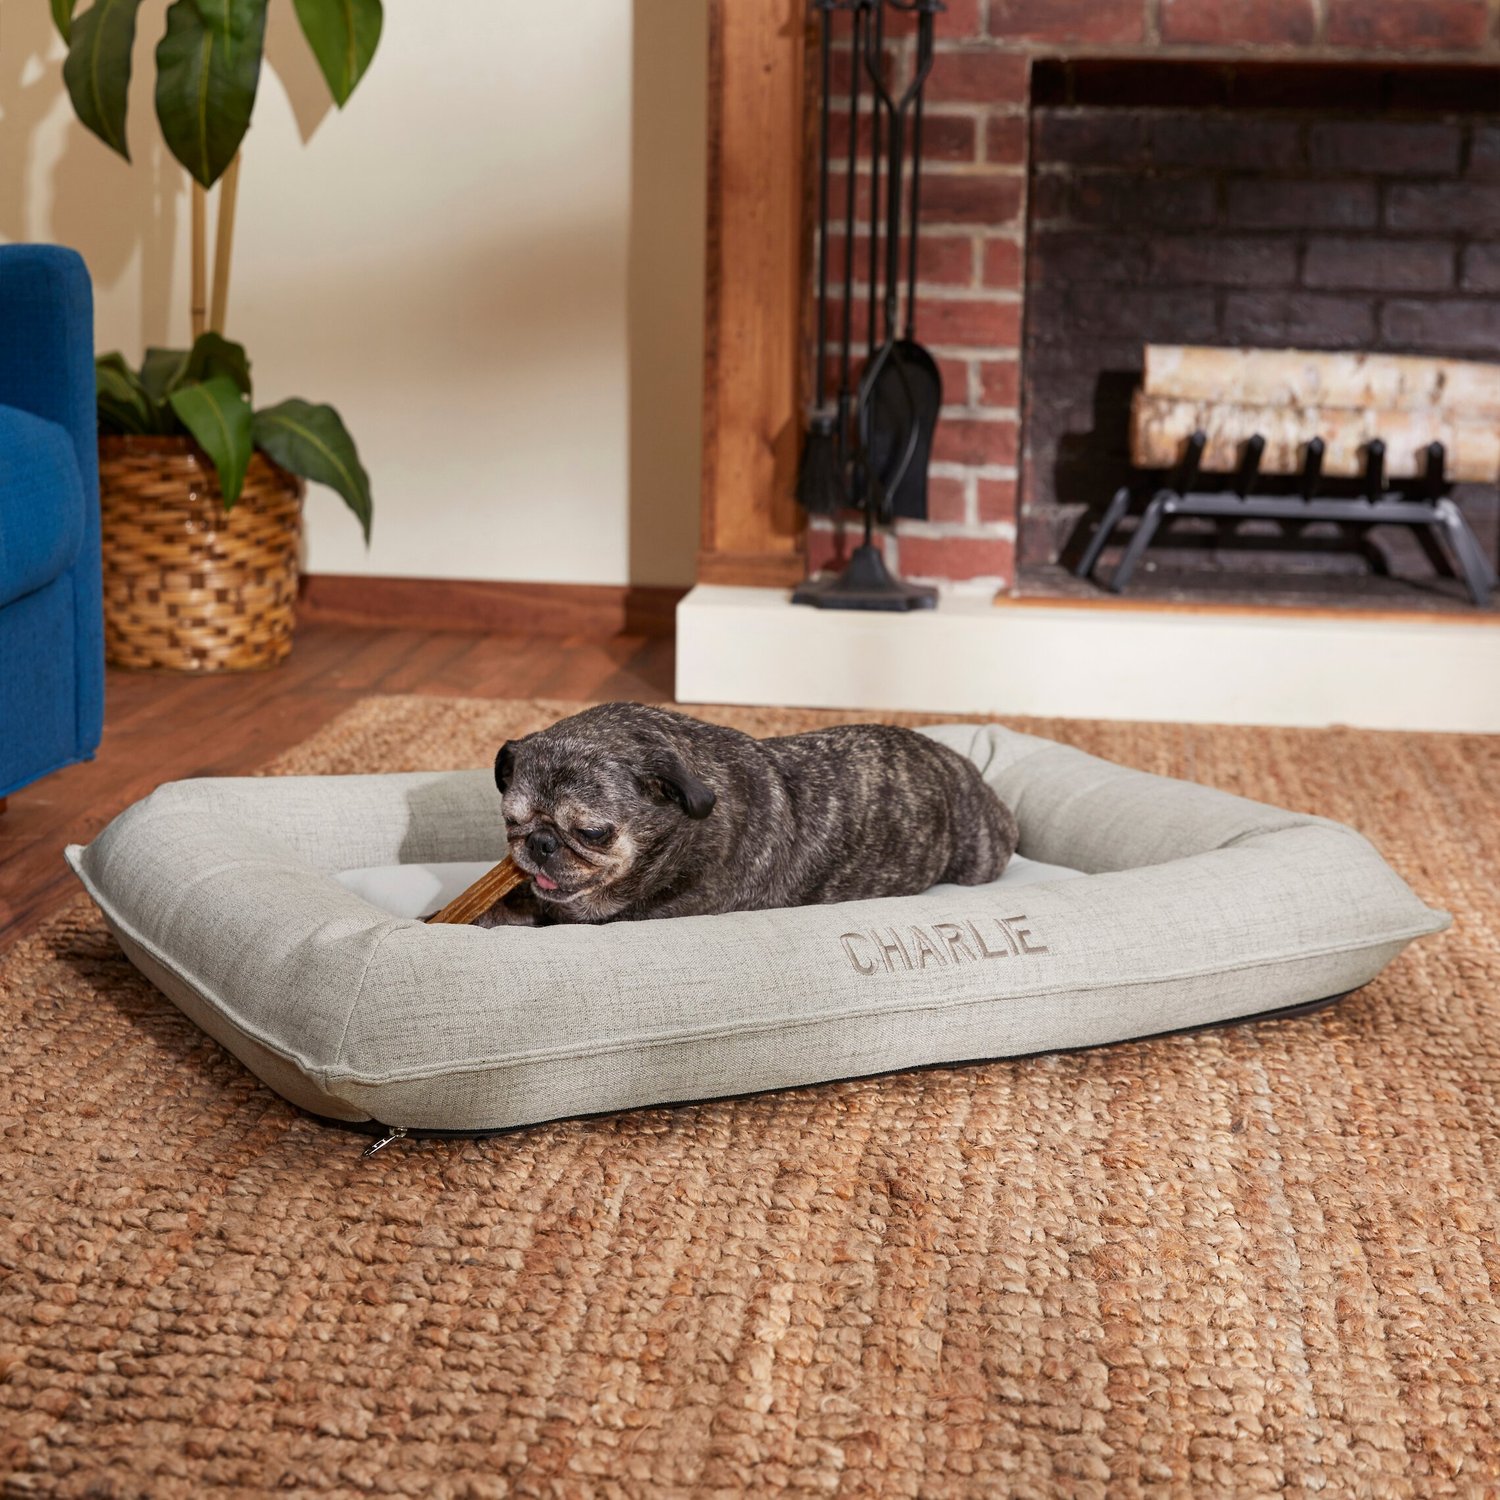 Personalized dog bed